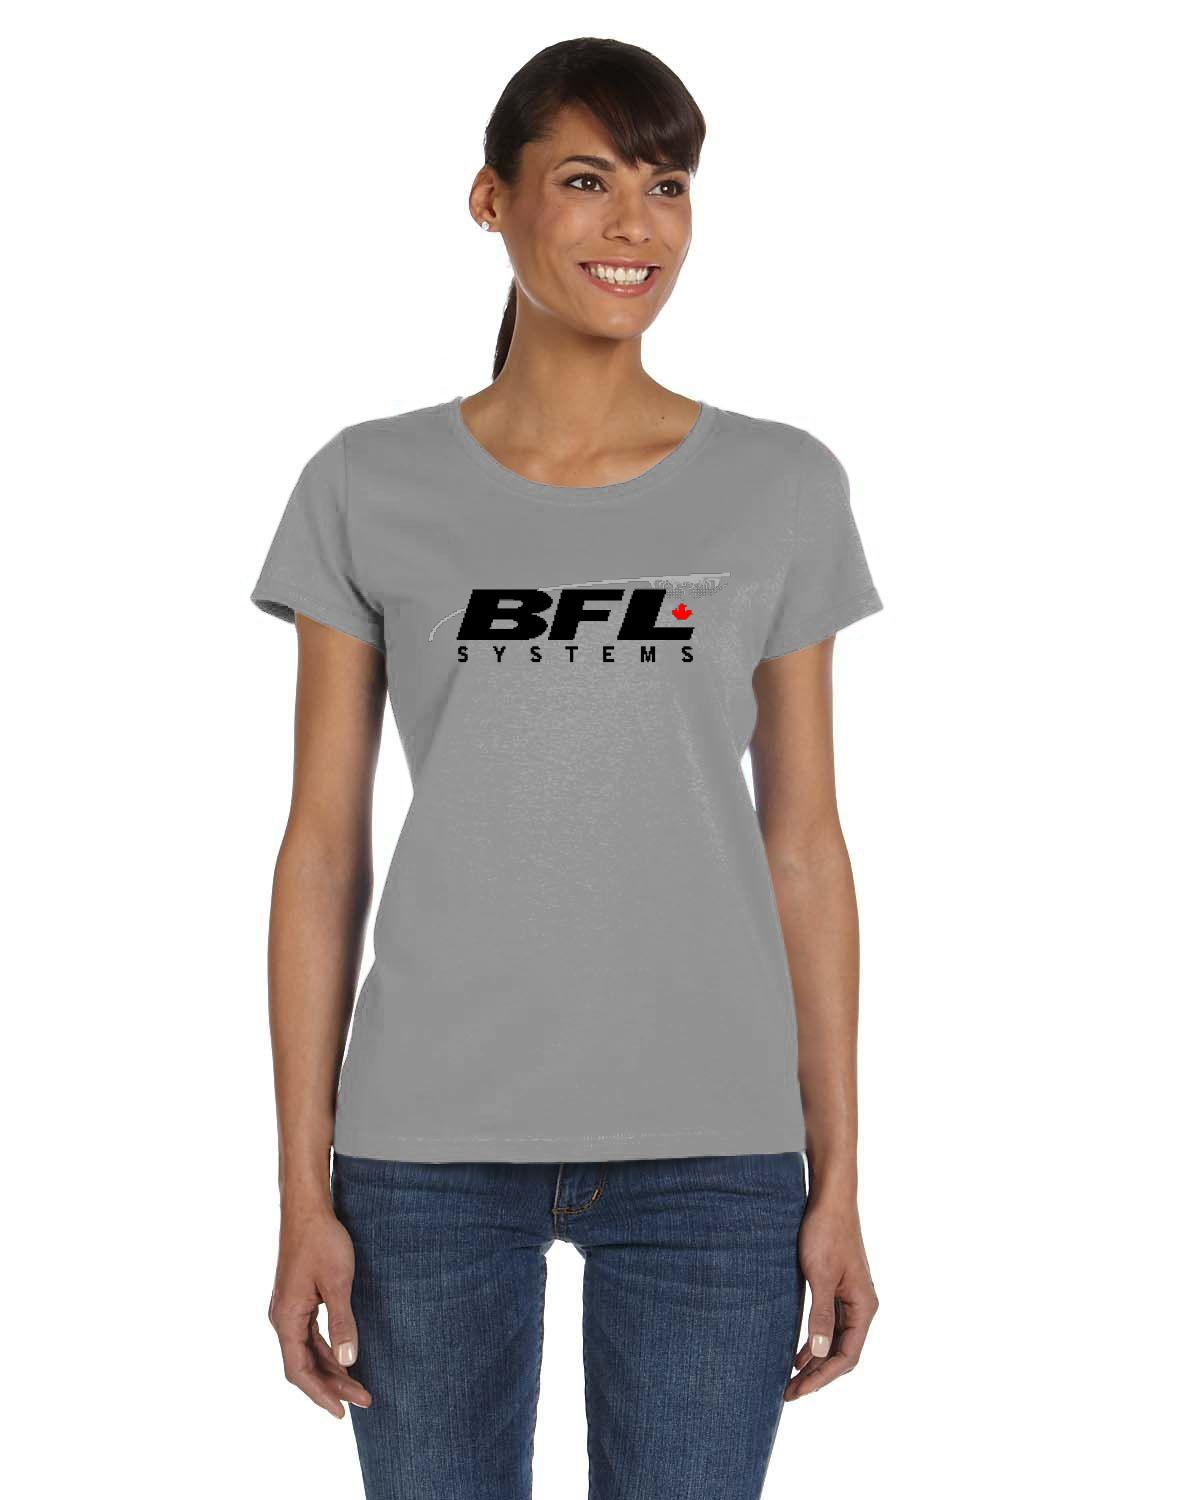 BFL Systems Ladies T-Shirt